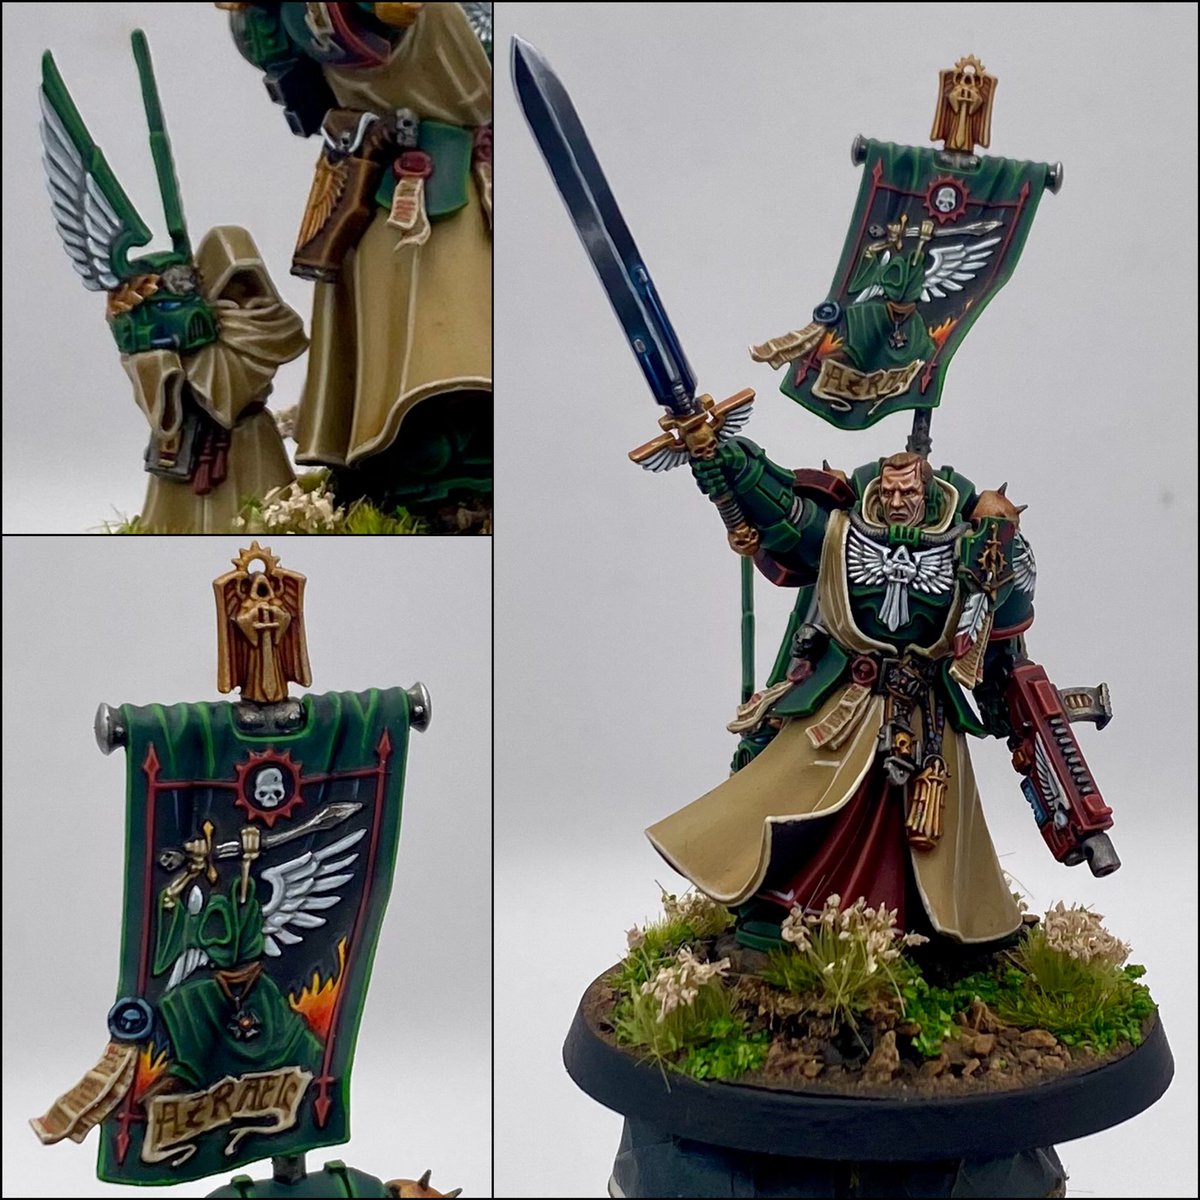 Sometimes, you have a bad week and can’t get much done. But then a friend says he needs an Azrael for a local tournament the next day…and this is the result. #WarhammerCommunity #DarkAngels #Warhammer40k #PaintingWarhammer